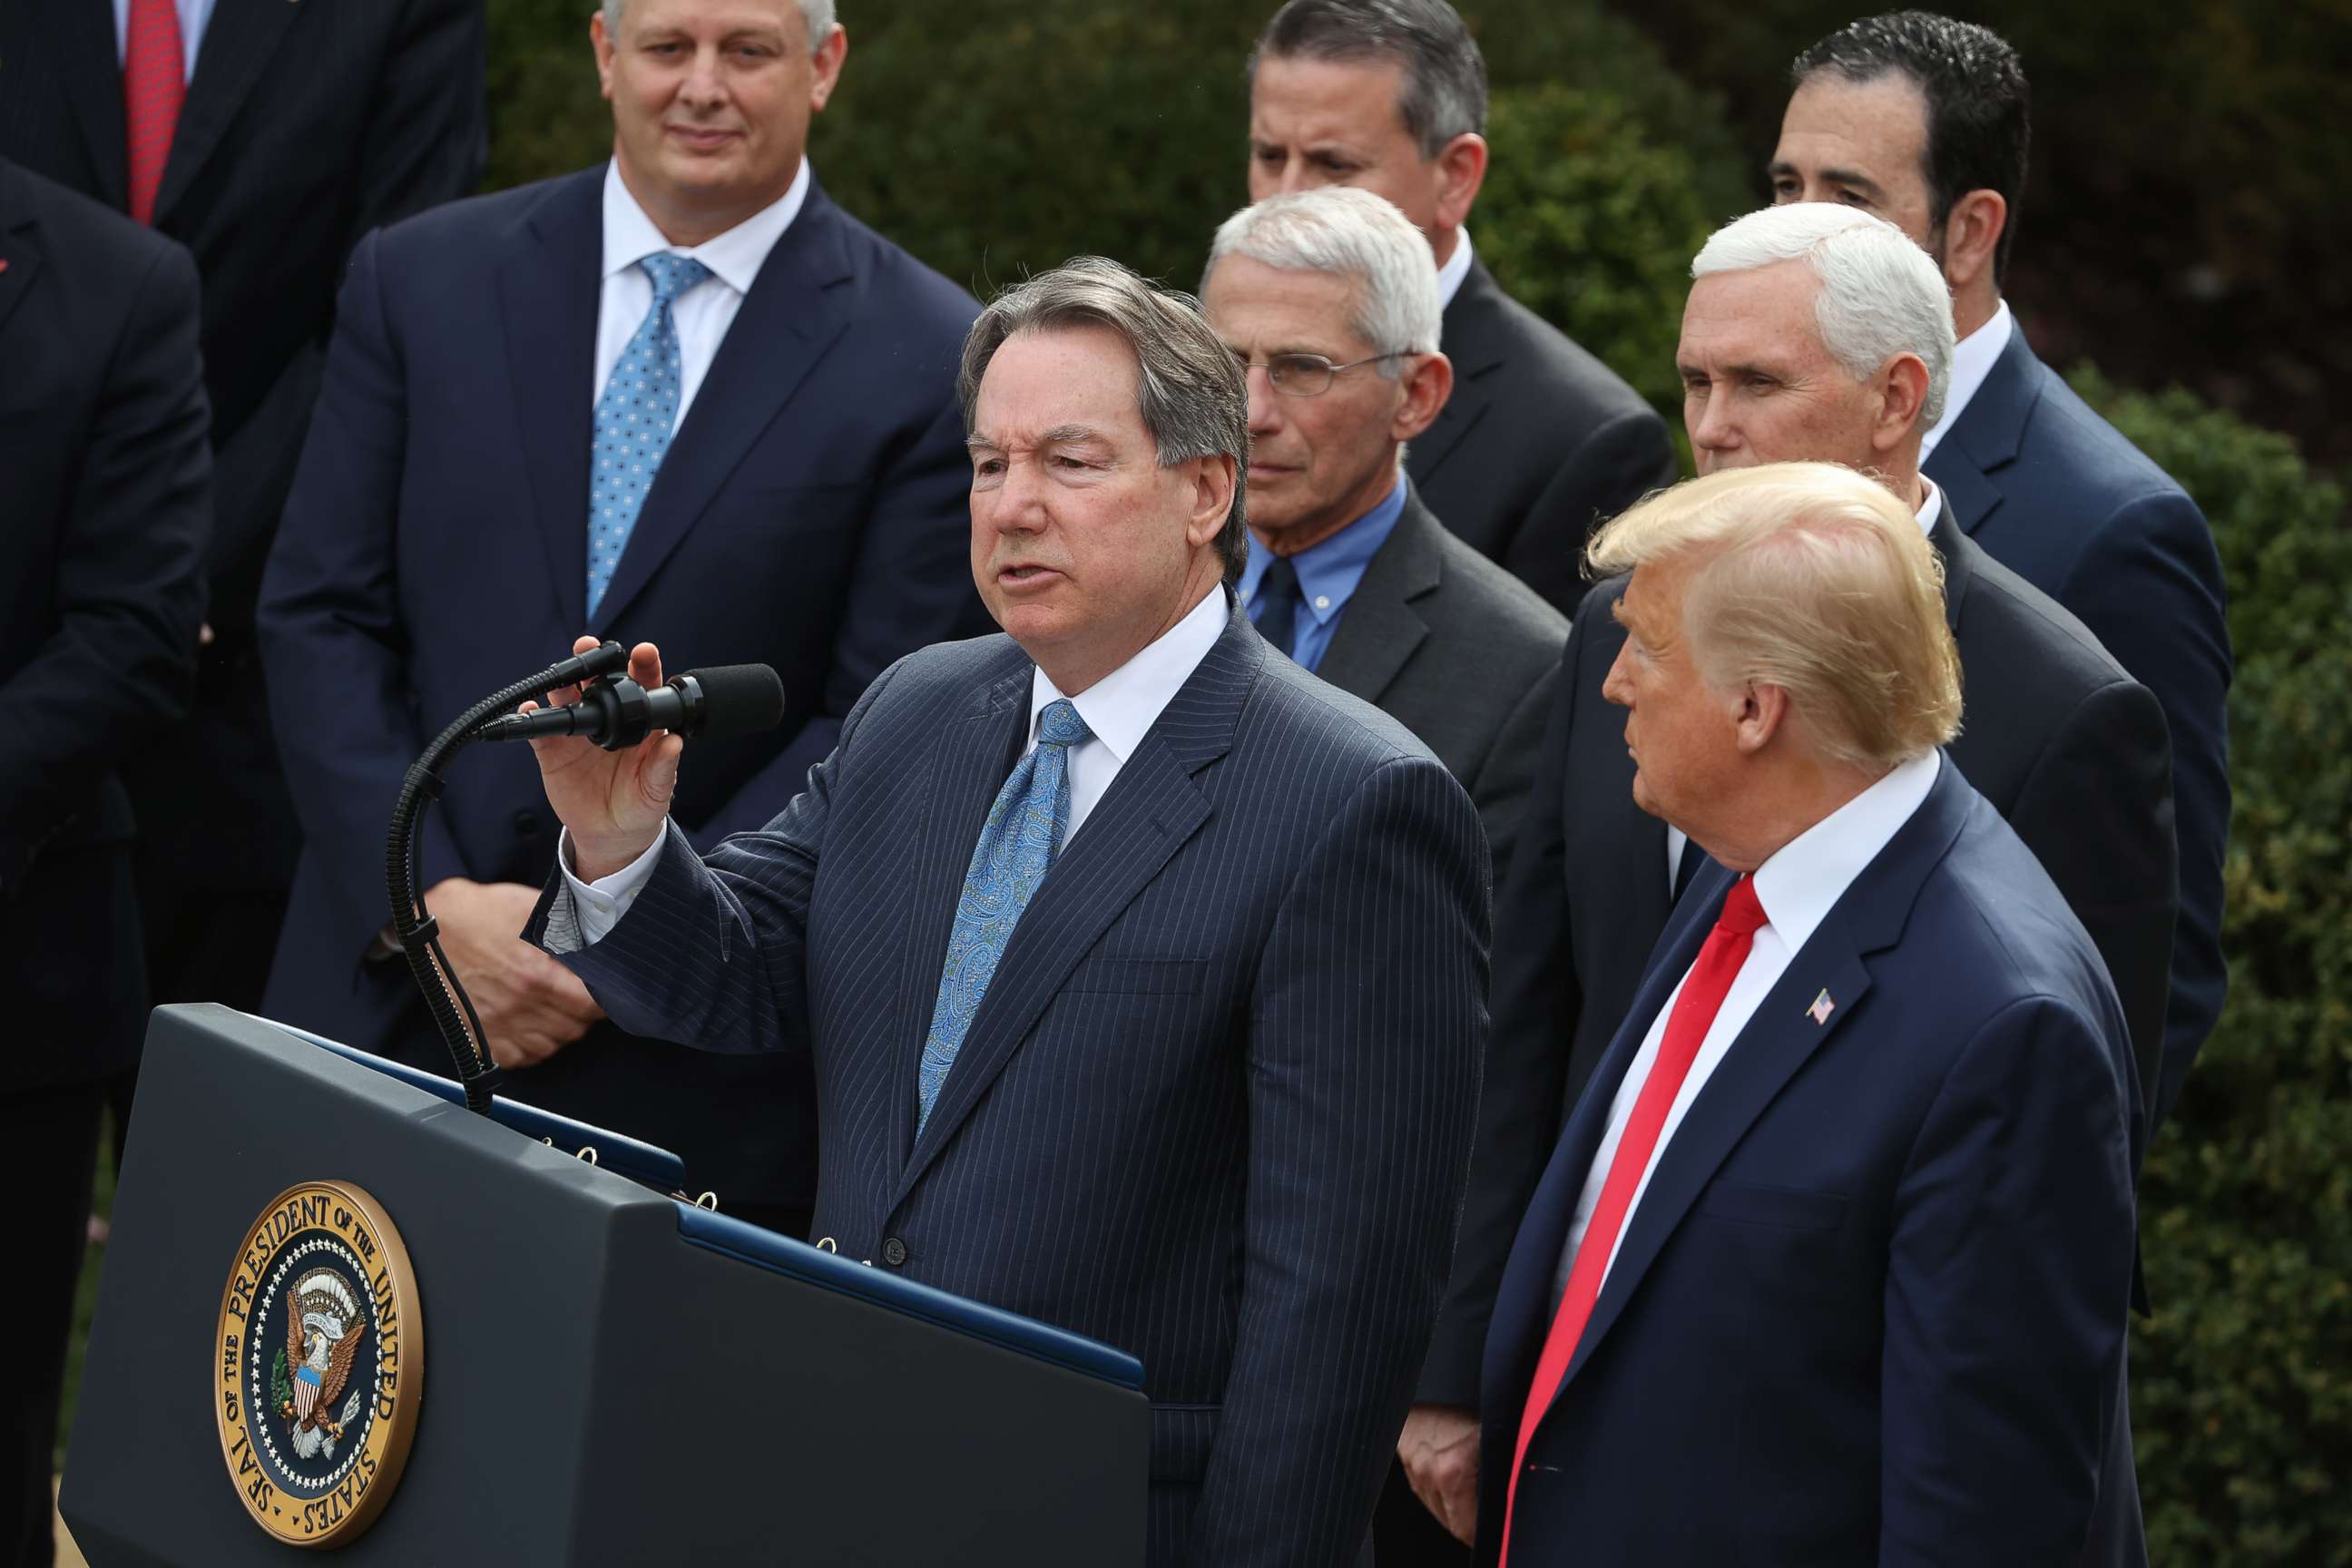 PHOTO: Quest Diagnostics CEO Steve Rusckowski delivers remarks during a news conference where President Donald Trump announced a national emergency in reaction to the ongoing coronavirus pandemic at the White House March 13, 2020 in Washington, D.C.